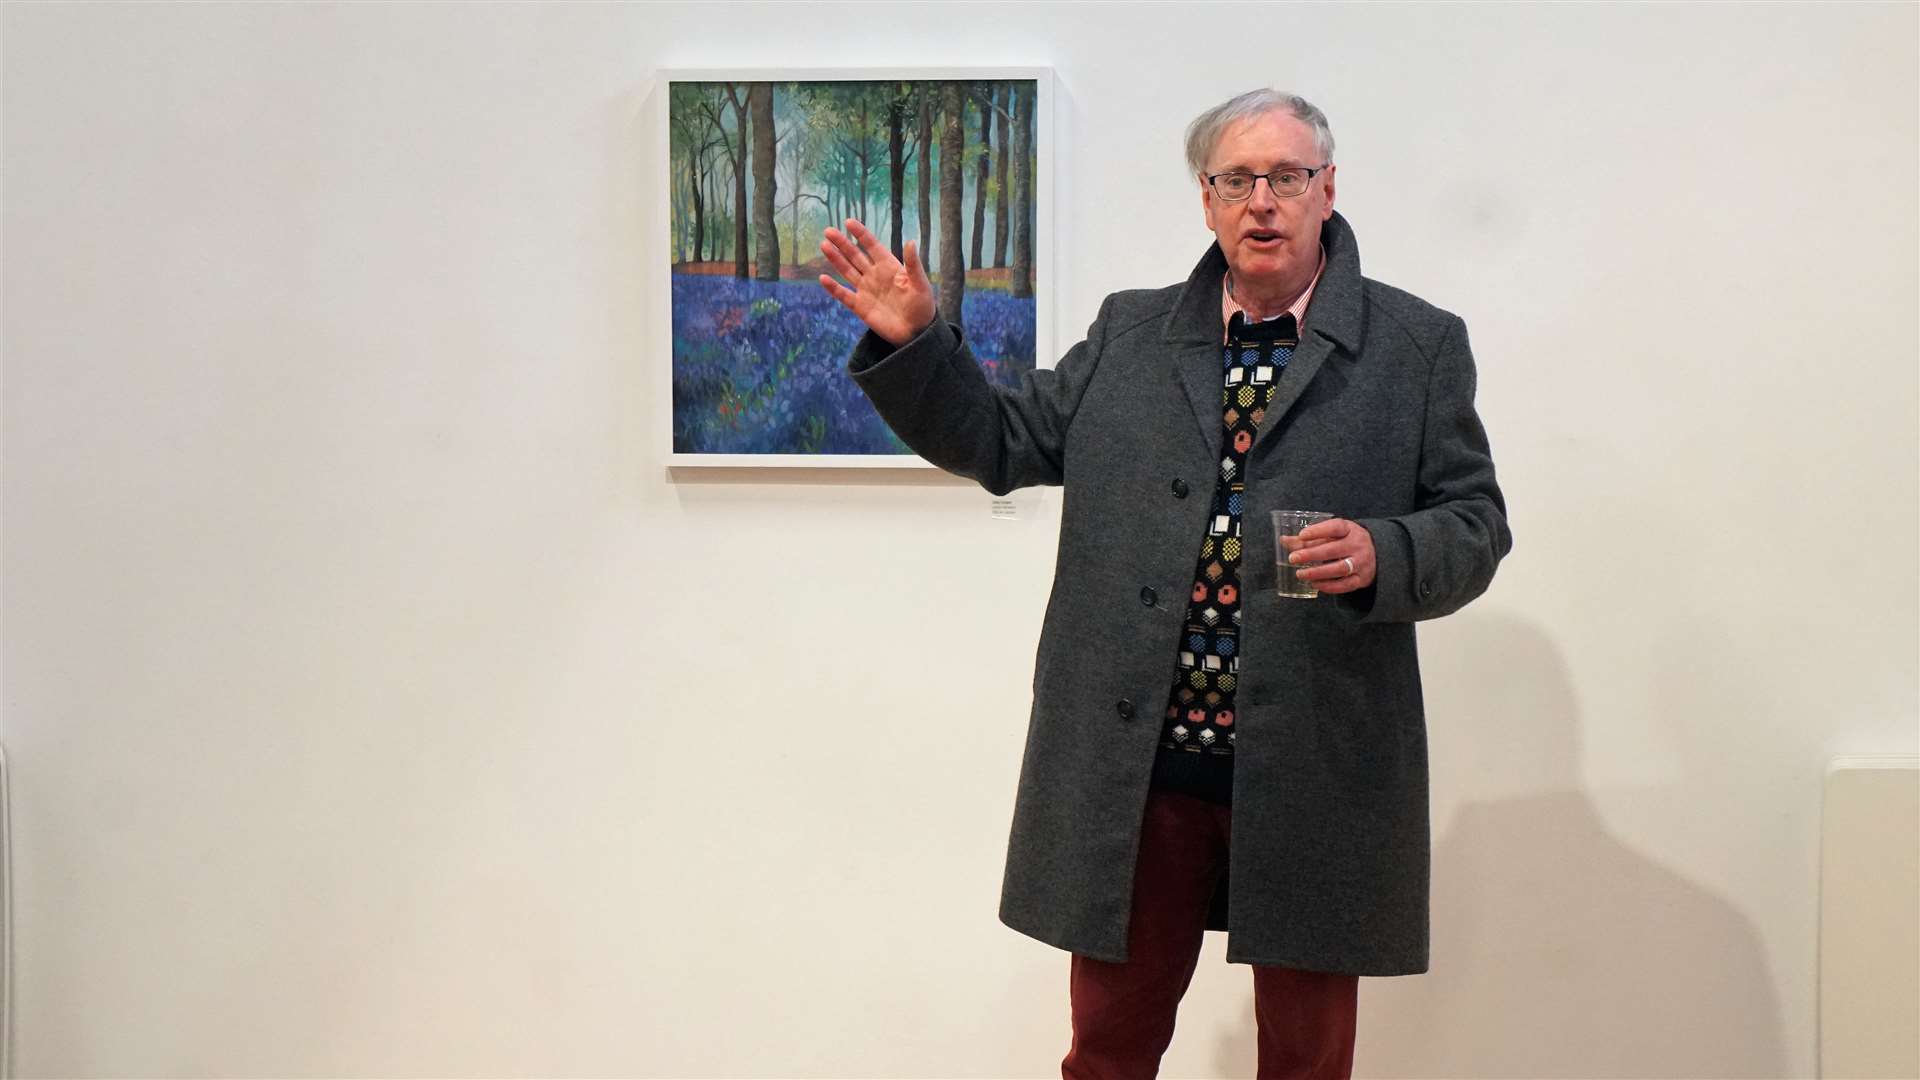 Ian Pearson, chairman of the Society of Caithness Artists, introduces the exhibition on Monday afternoon. Picture: DGS